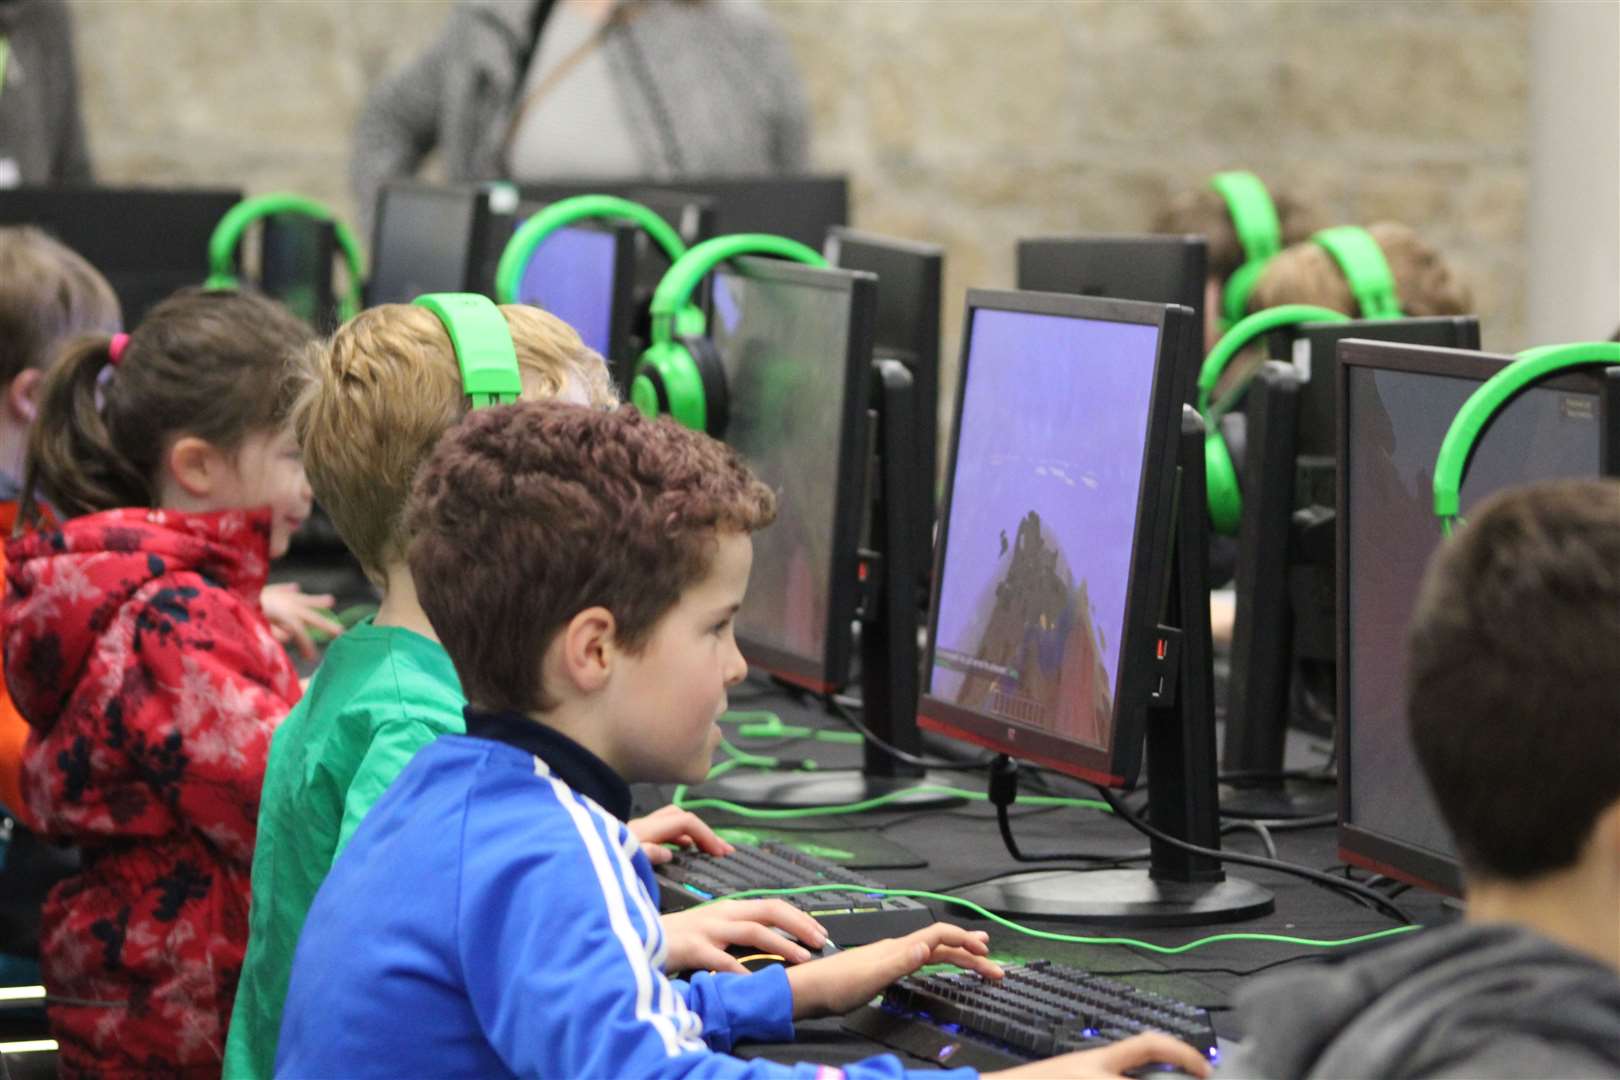 Gamers will flock to Dreamland this weekend